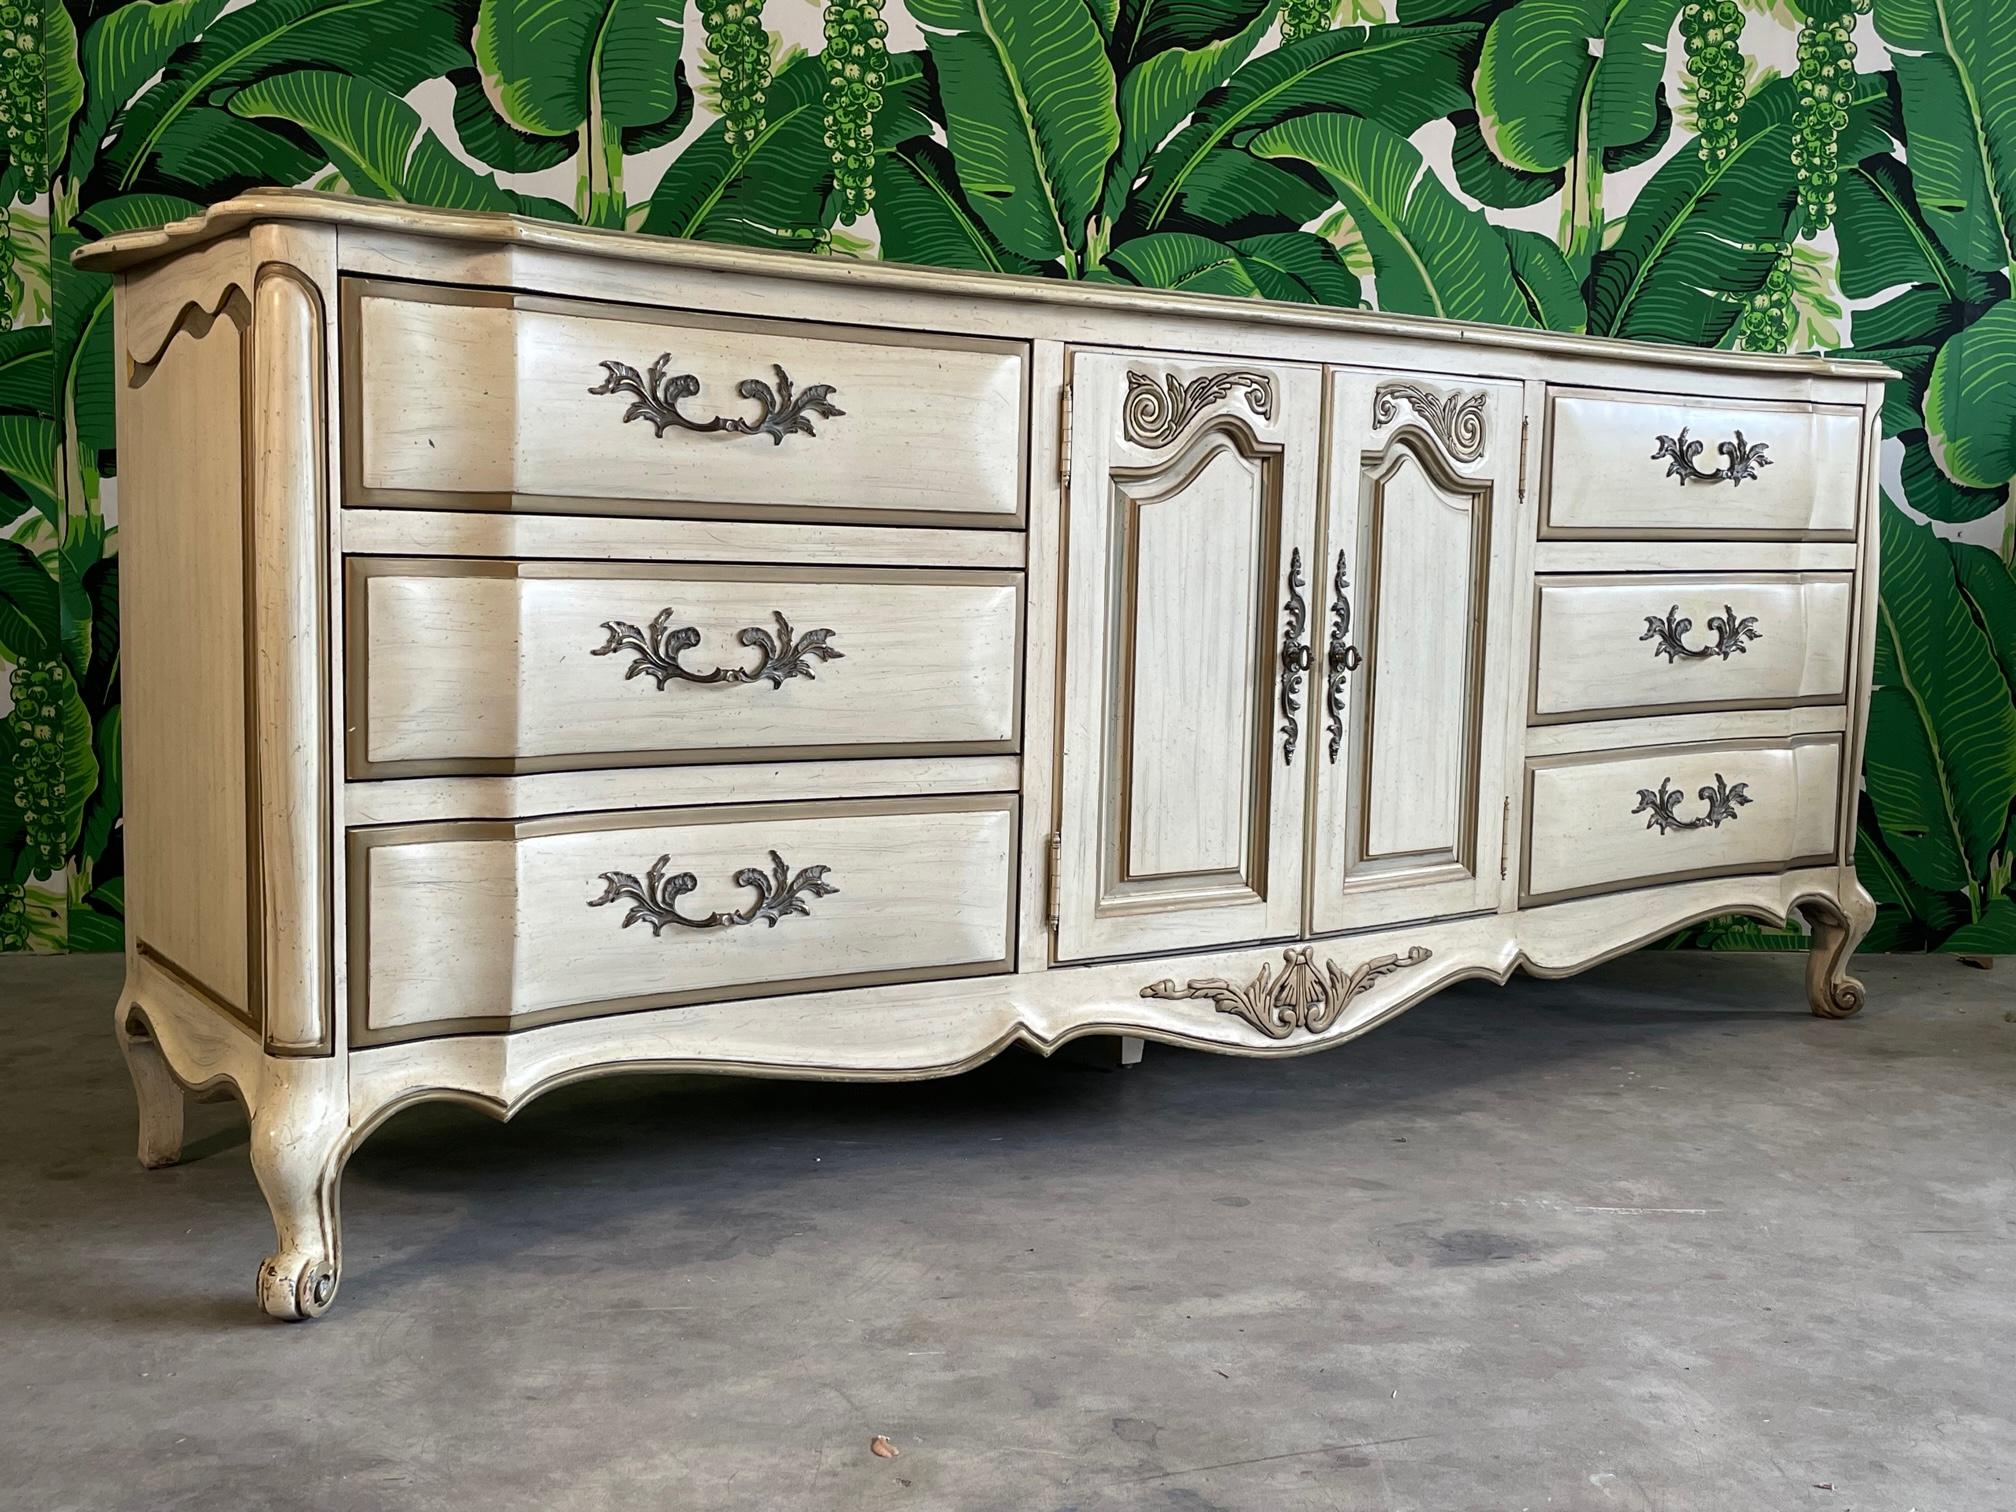 Vintage 20th century French provincial dresser features bombe style detailing, cabriole legs, and scrolled feet. Shaped top and skirt along with bronze hardware. Good condition with minor imperfections consistent with age, see photos for condition